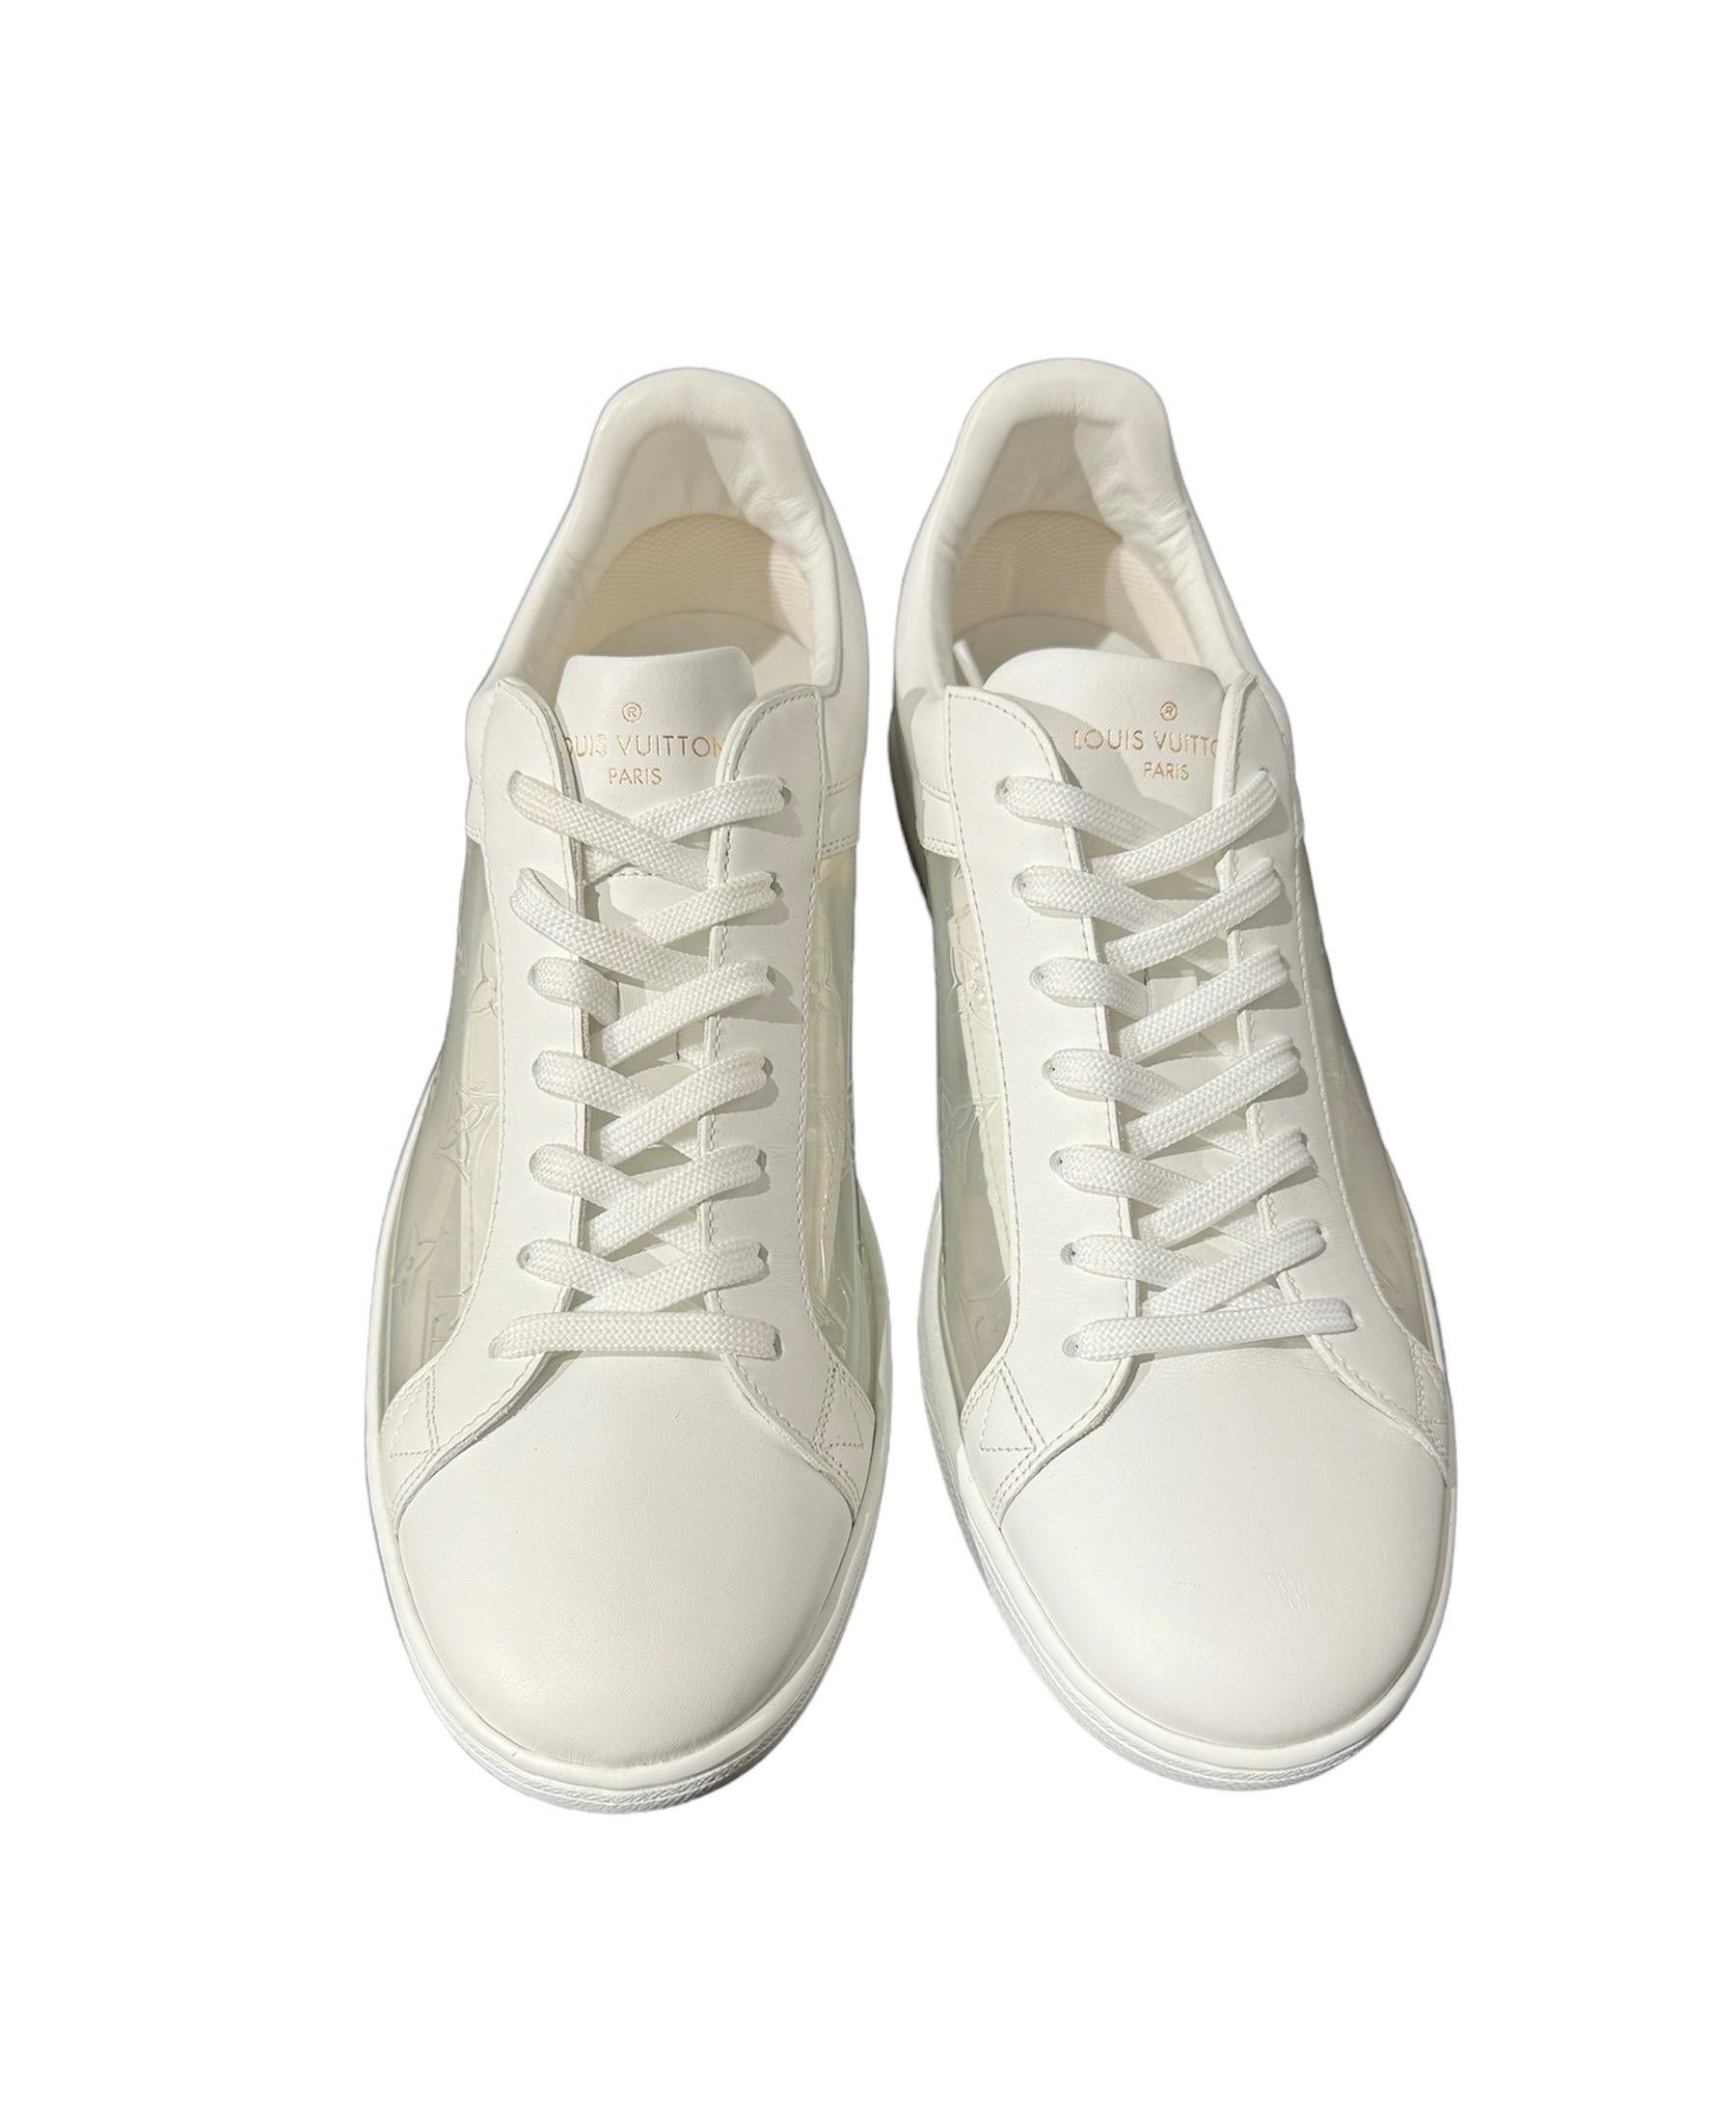 Women's or Men's Louis Vuitton Sneakers Luxembourg For Sale